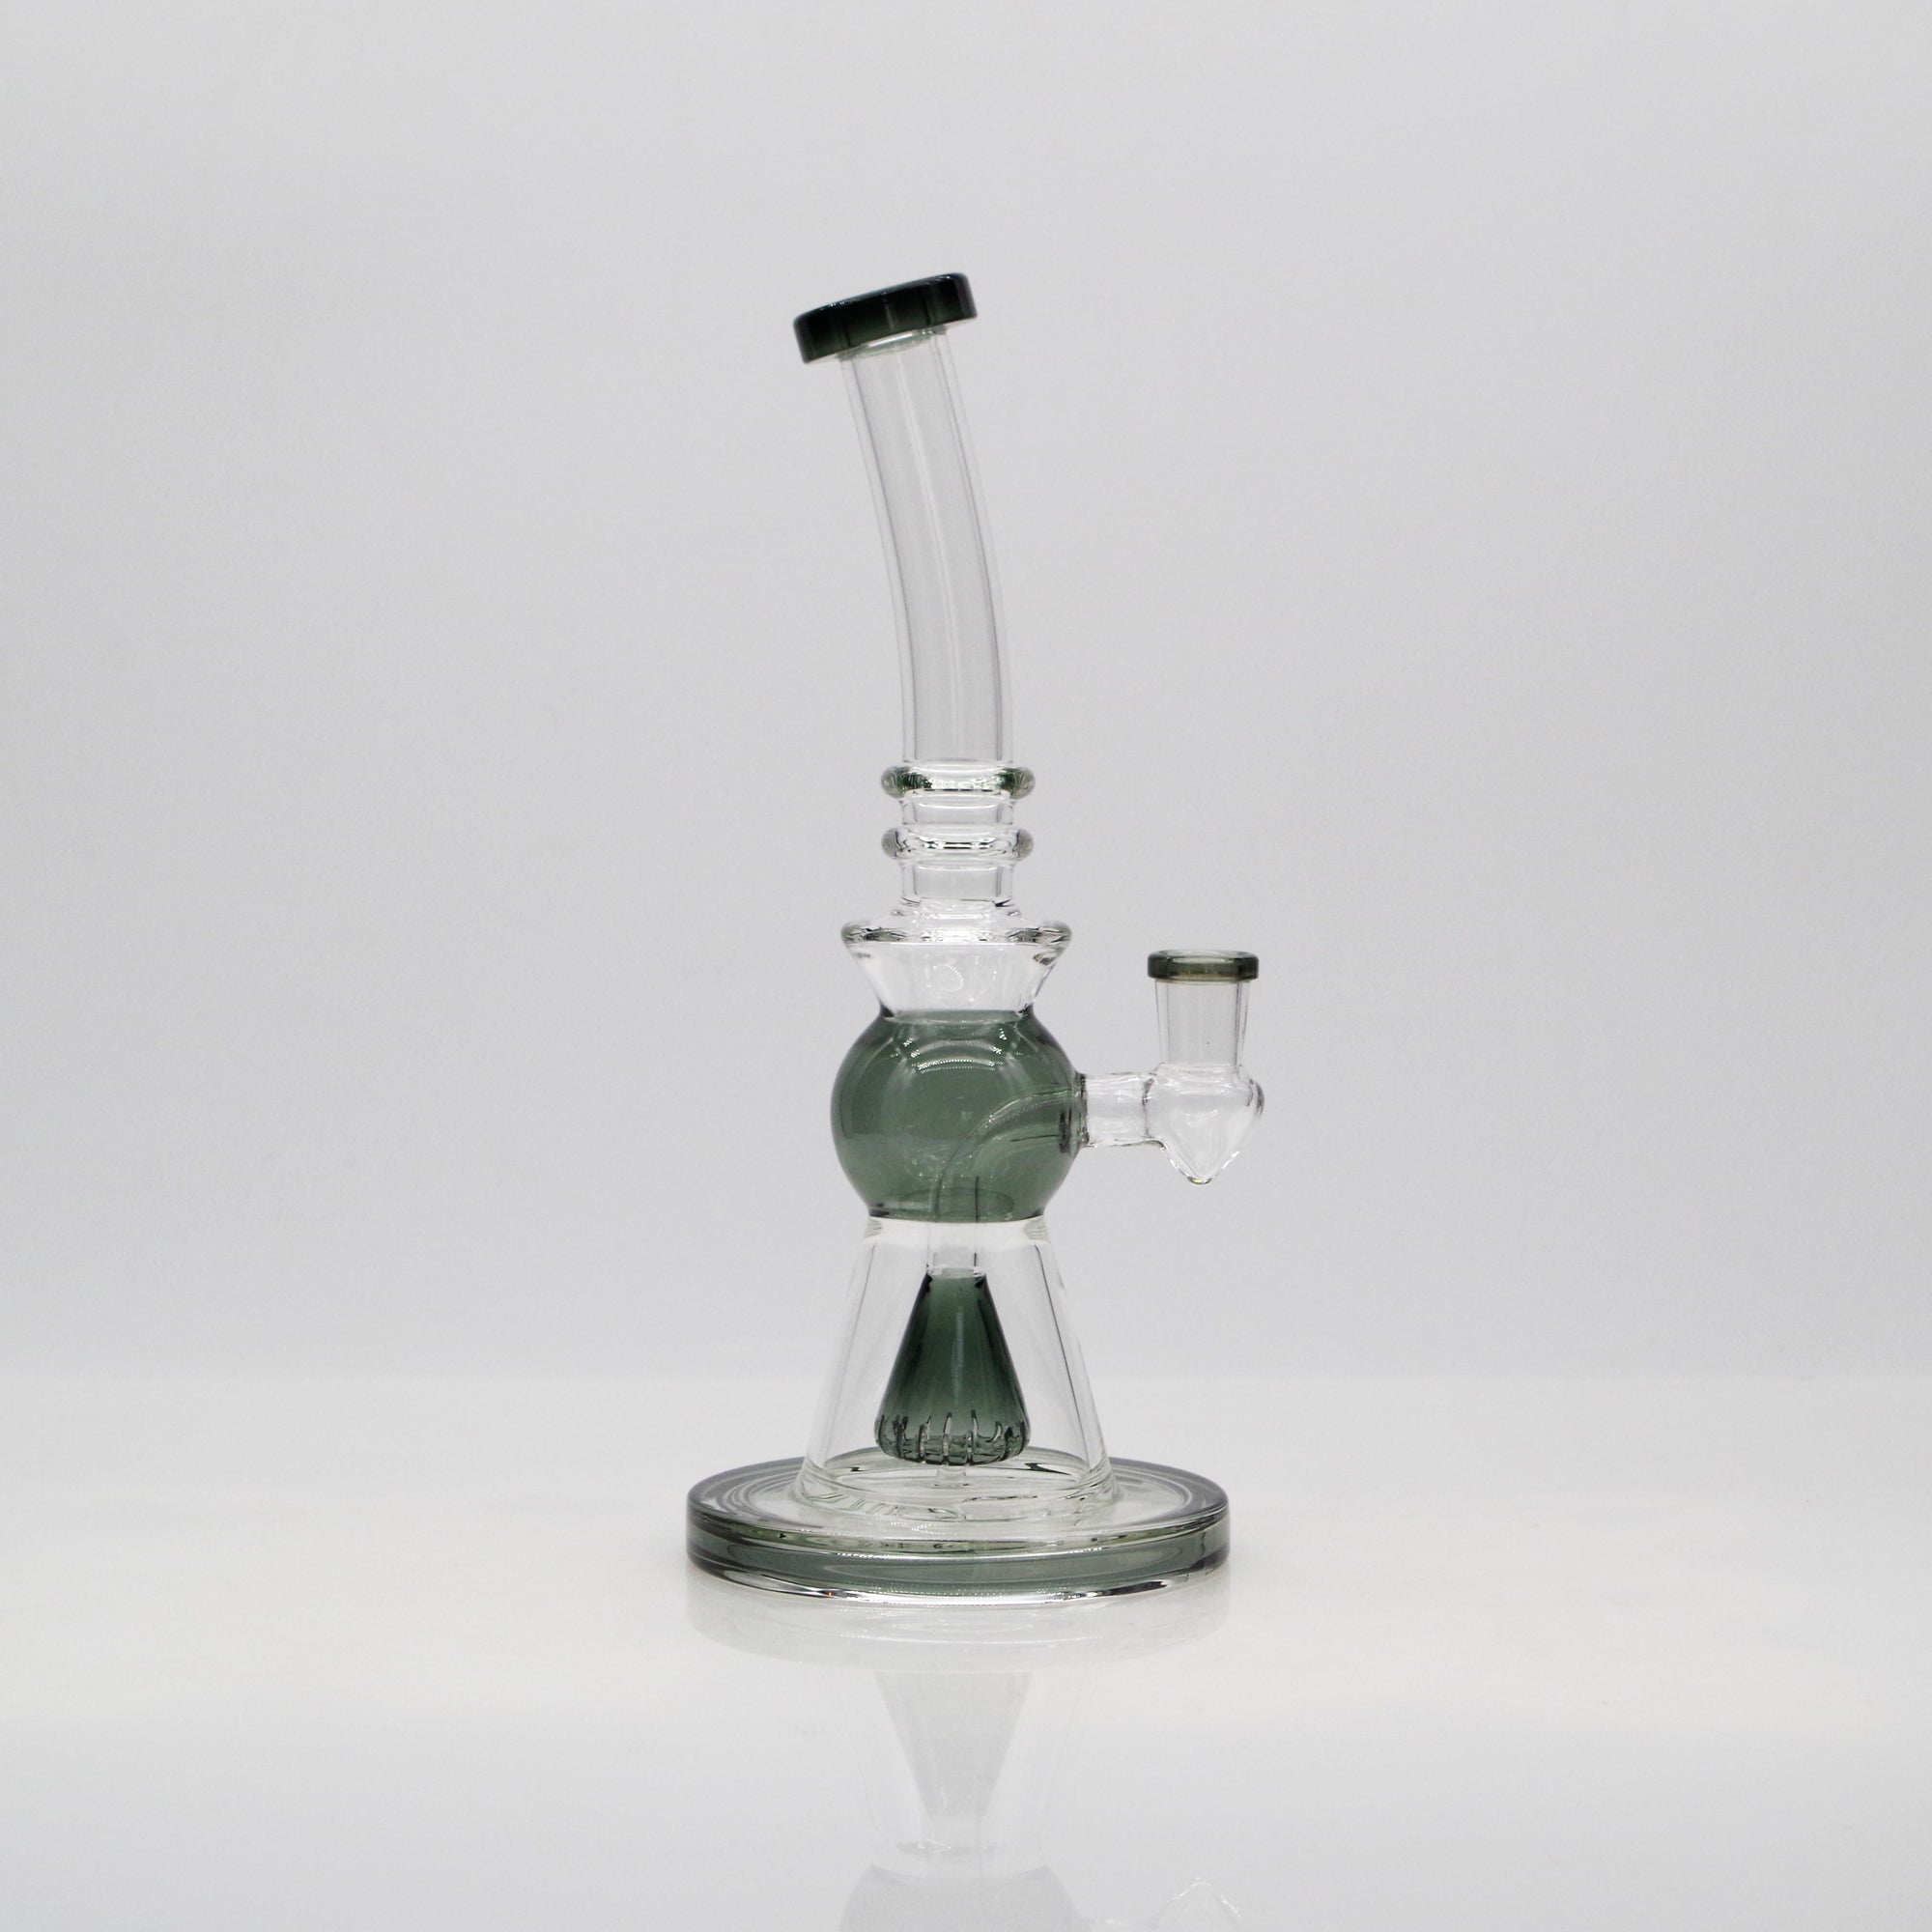 Colored Ball Rig (Online Only) - Smoke